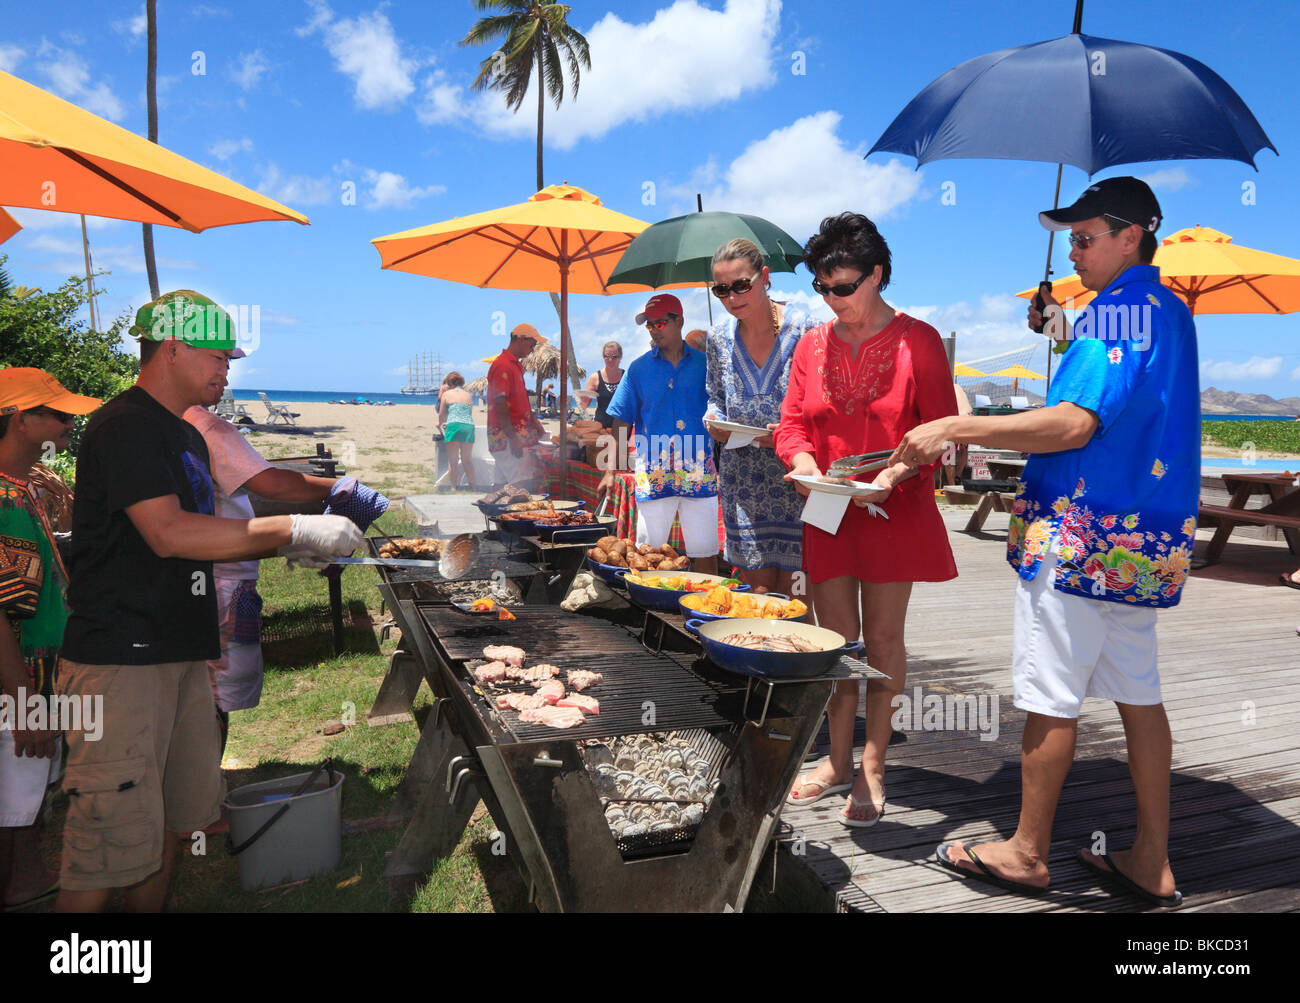 Barbeque on the beach at Nevis, for passengers on the Cruise Ship moored in the distance. Stock Photo